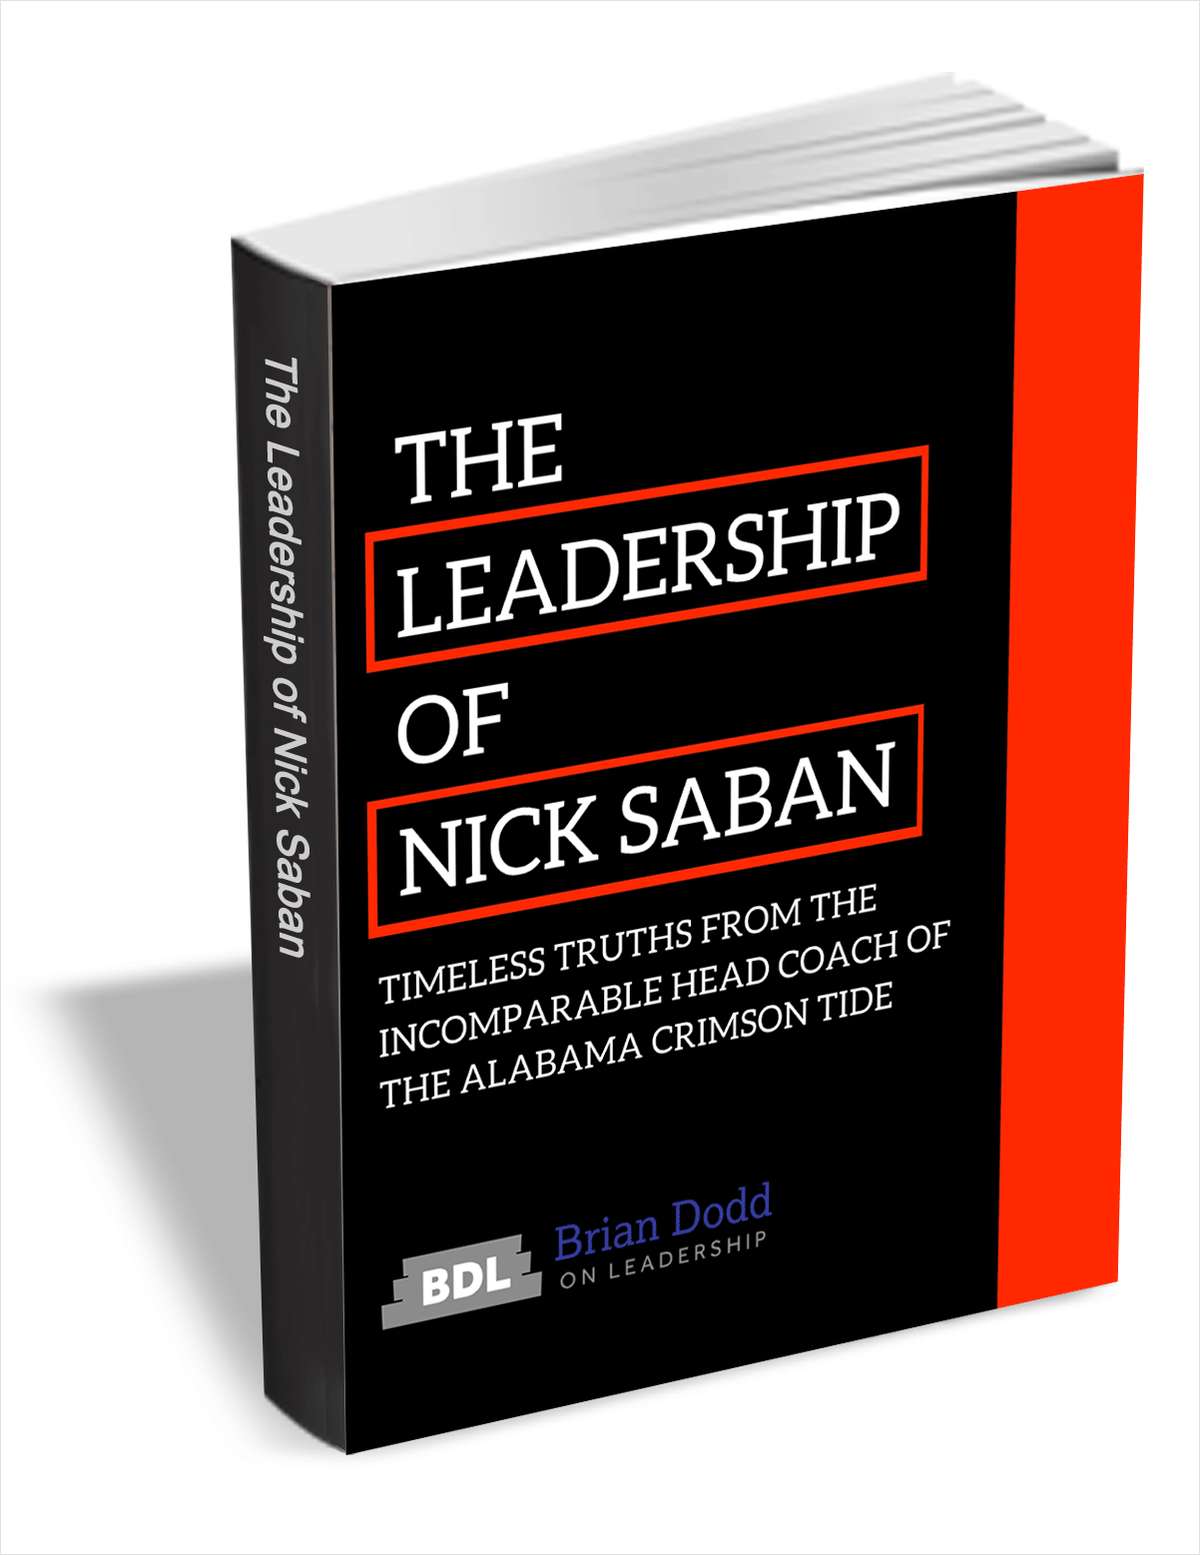 The Leadership of Nick Saban - Timeless Truths from the Incomparable Head Coach of the Alabama Crimson Tide